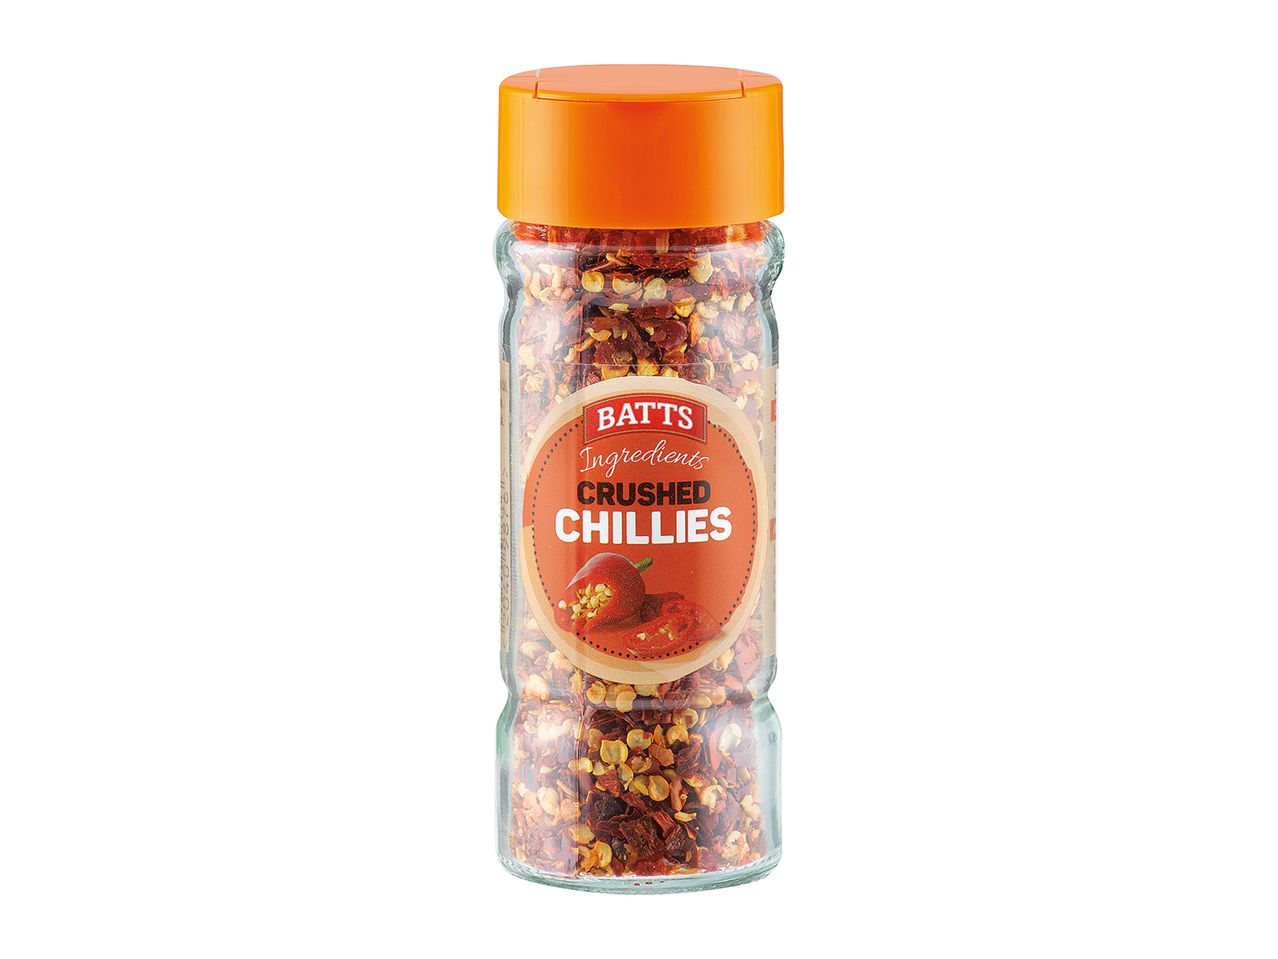 Go to full screen view: Batts Chilli Flakes - Image 1